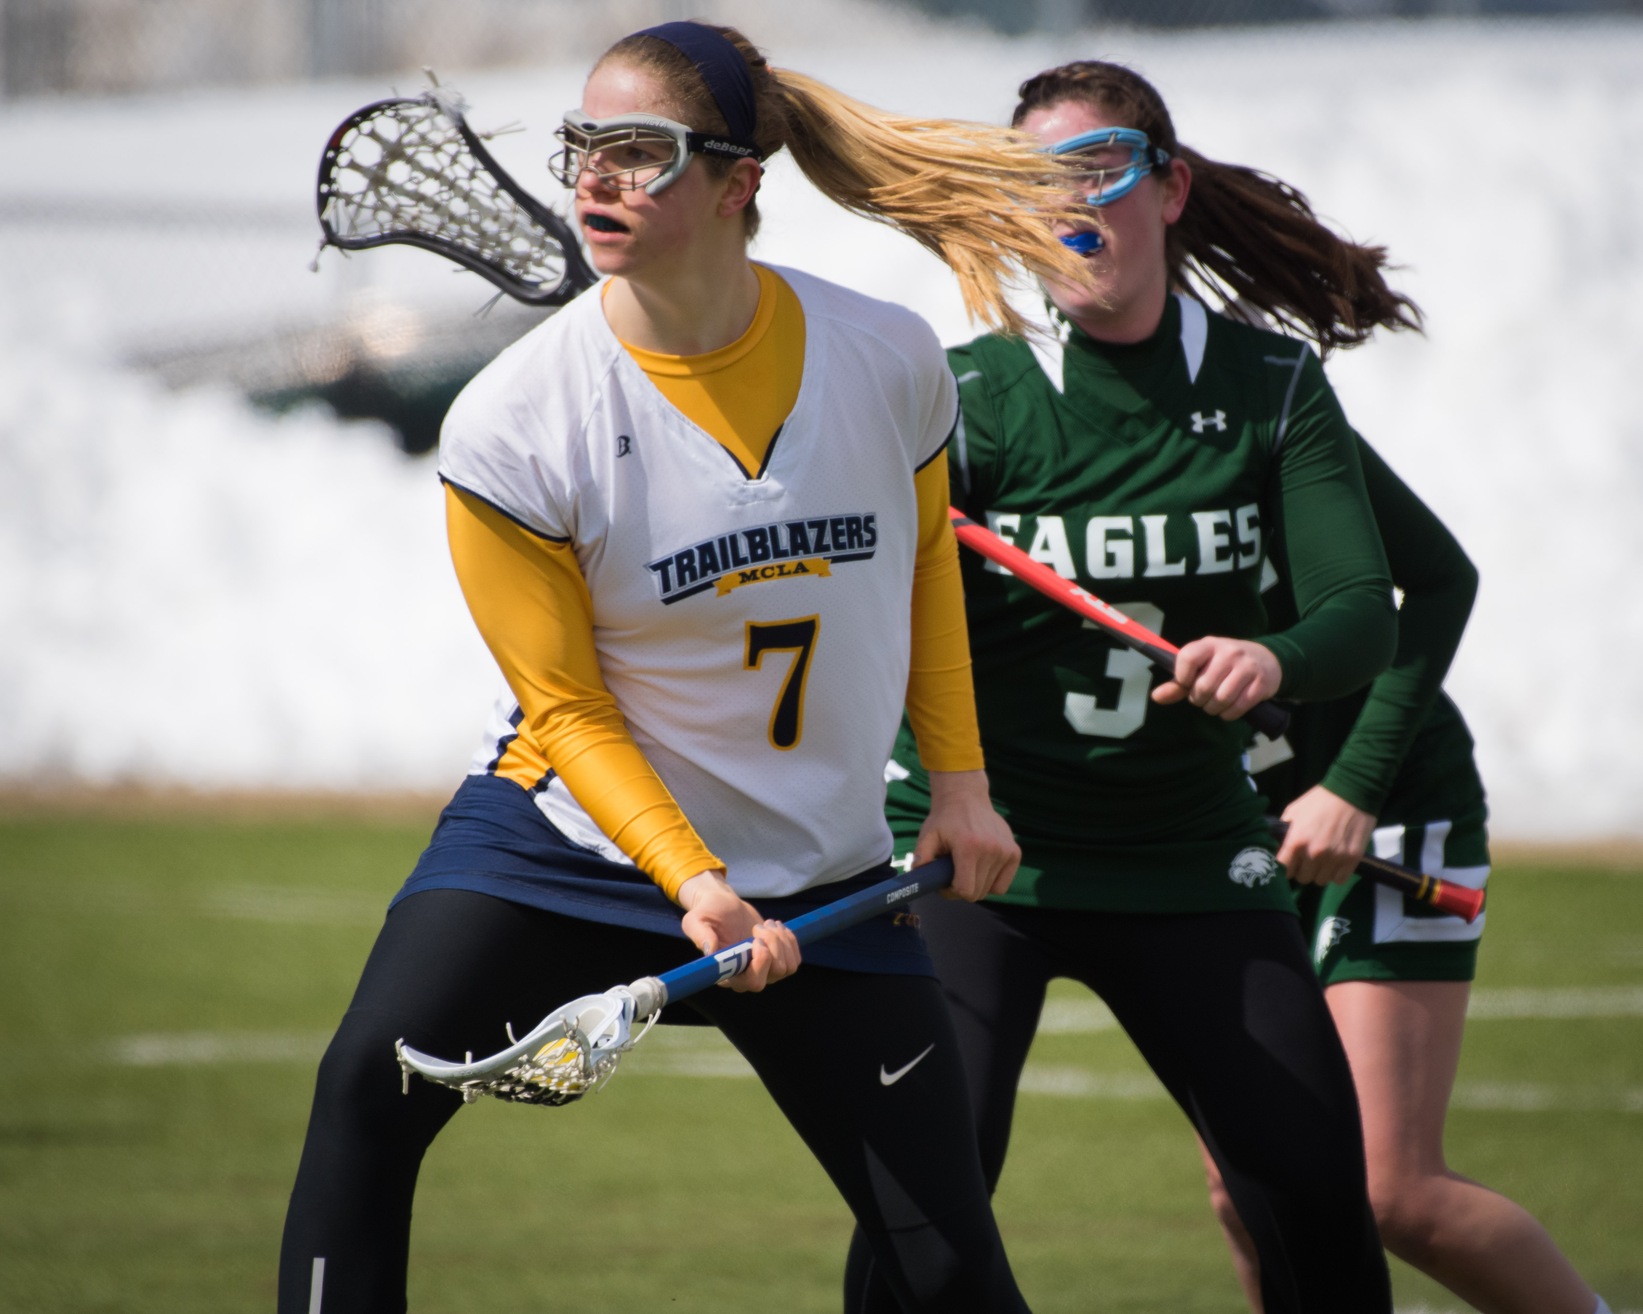 Morrell named to IWLCA Division III Academic Honor Roll